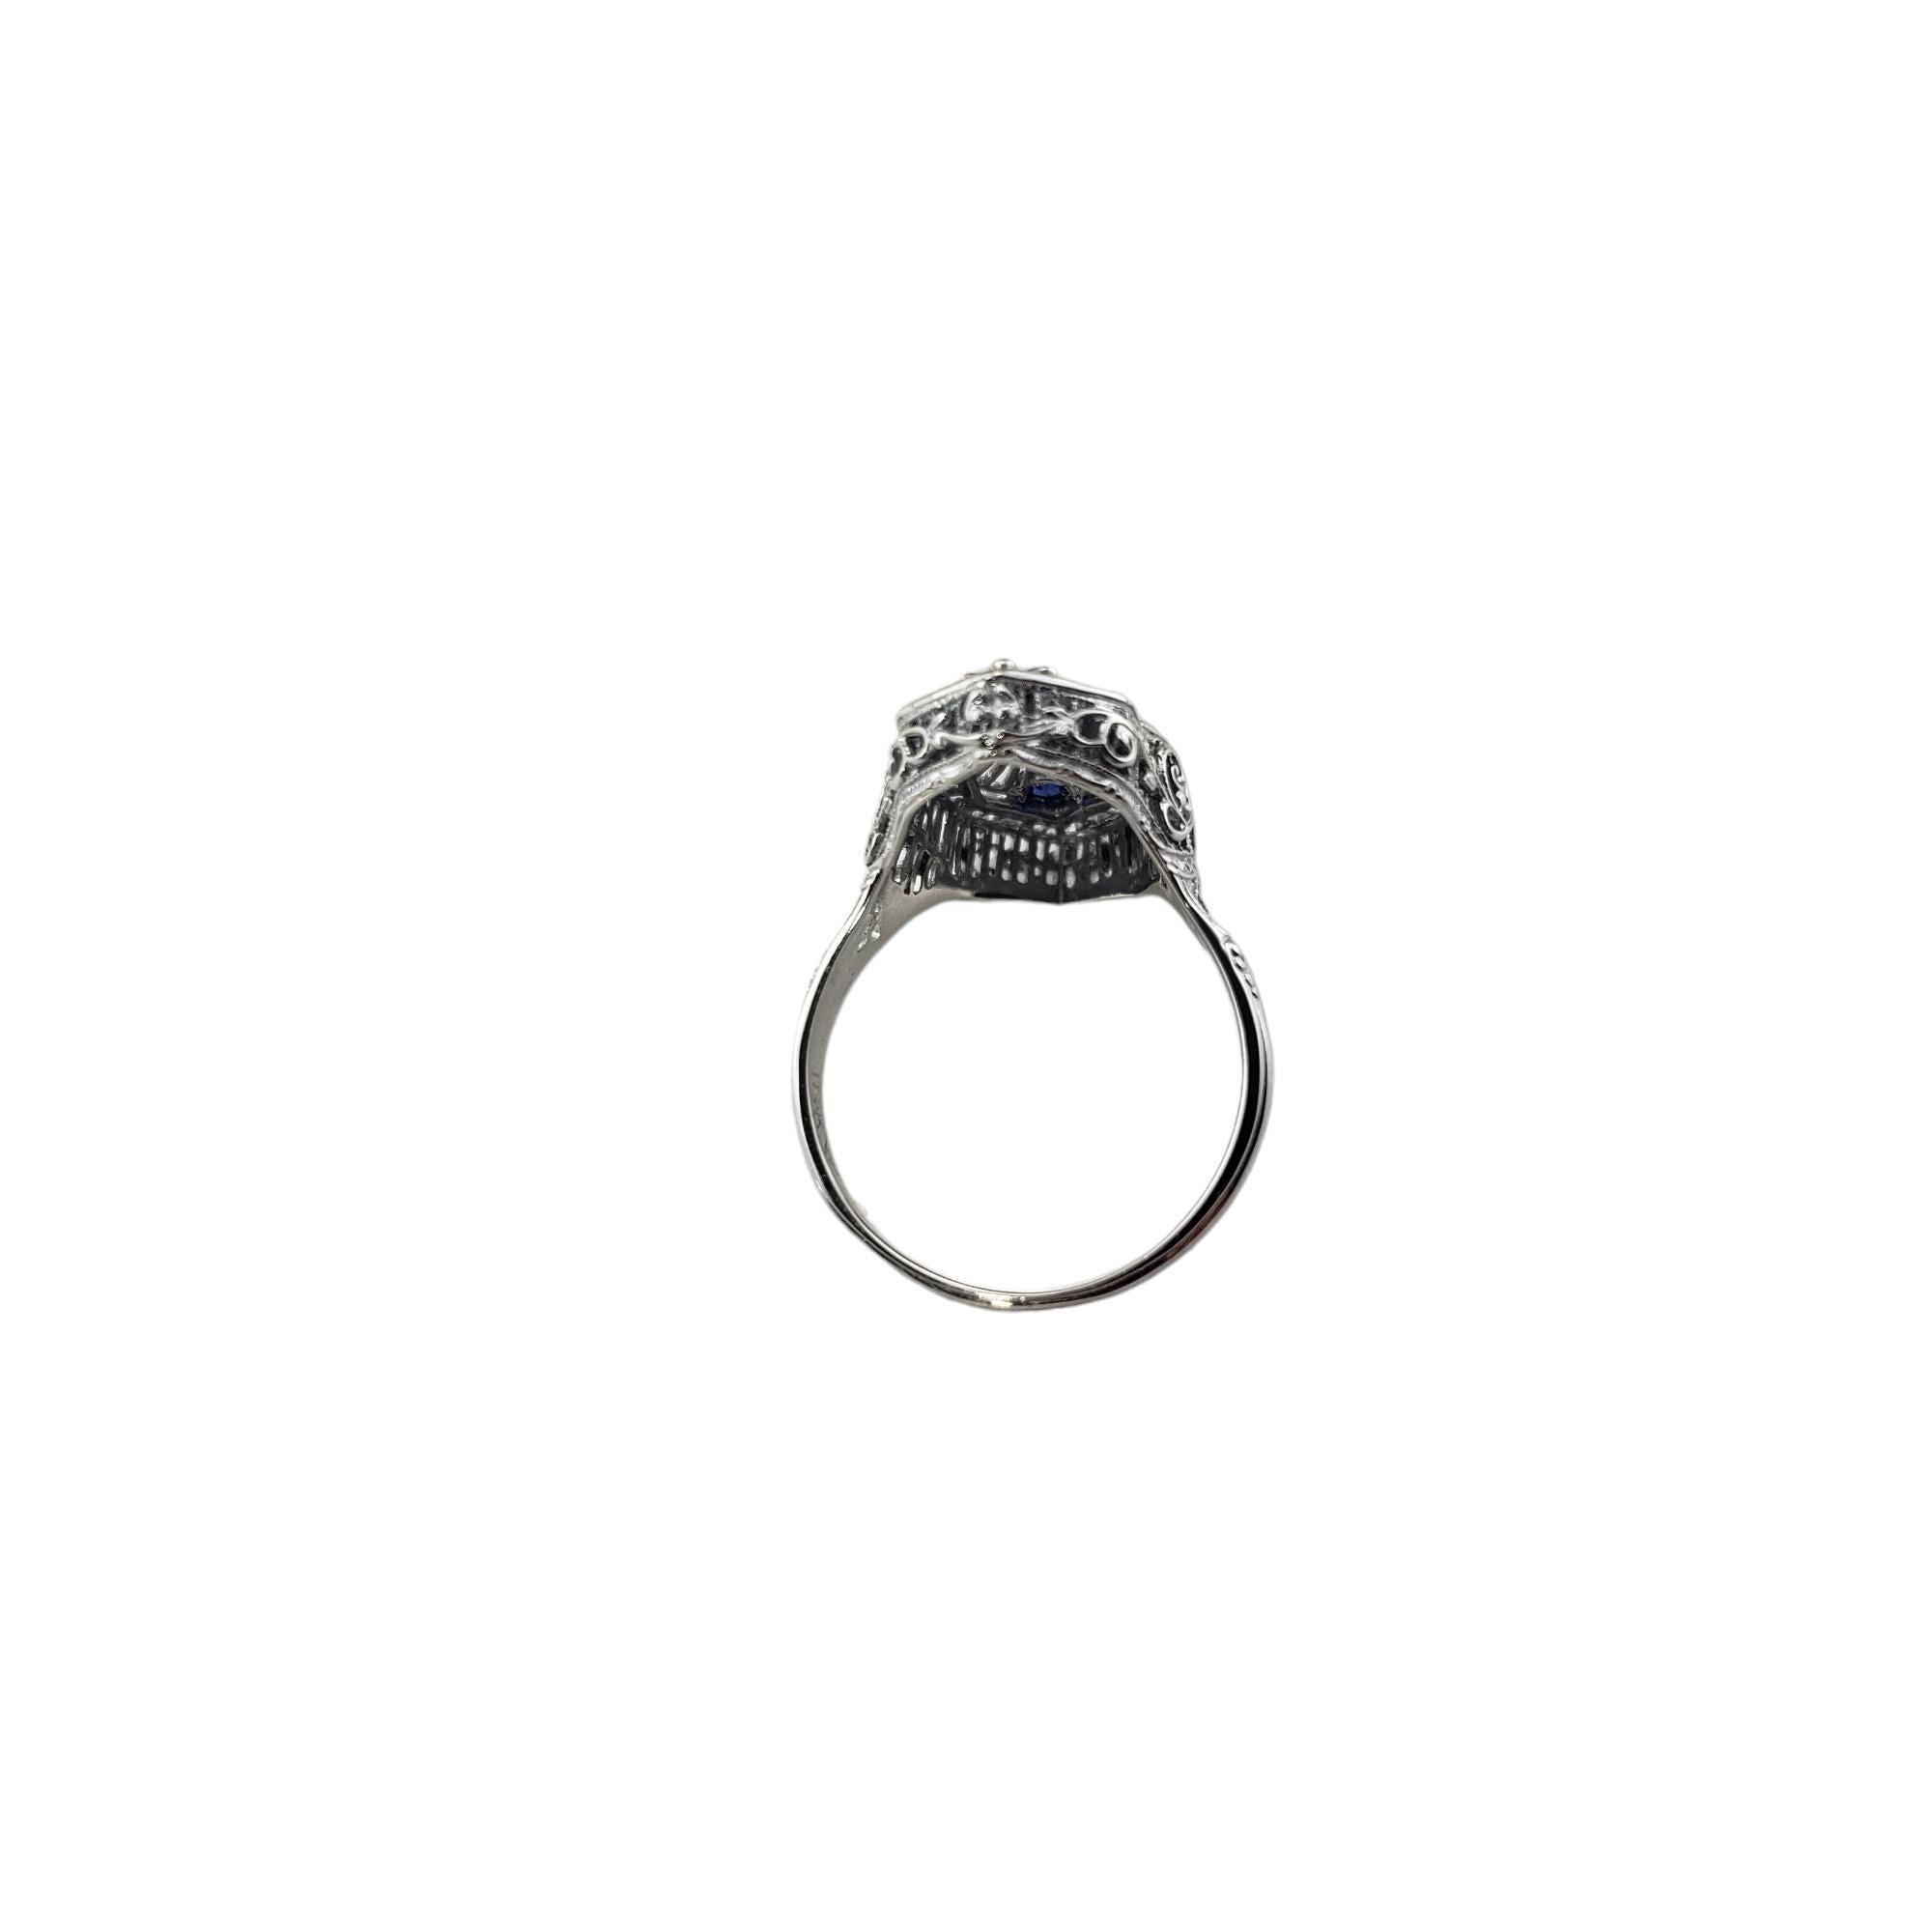 Women's 18K White Gold Sapphire and Diamond Ring Size 6.75 #15464 For Sale